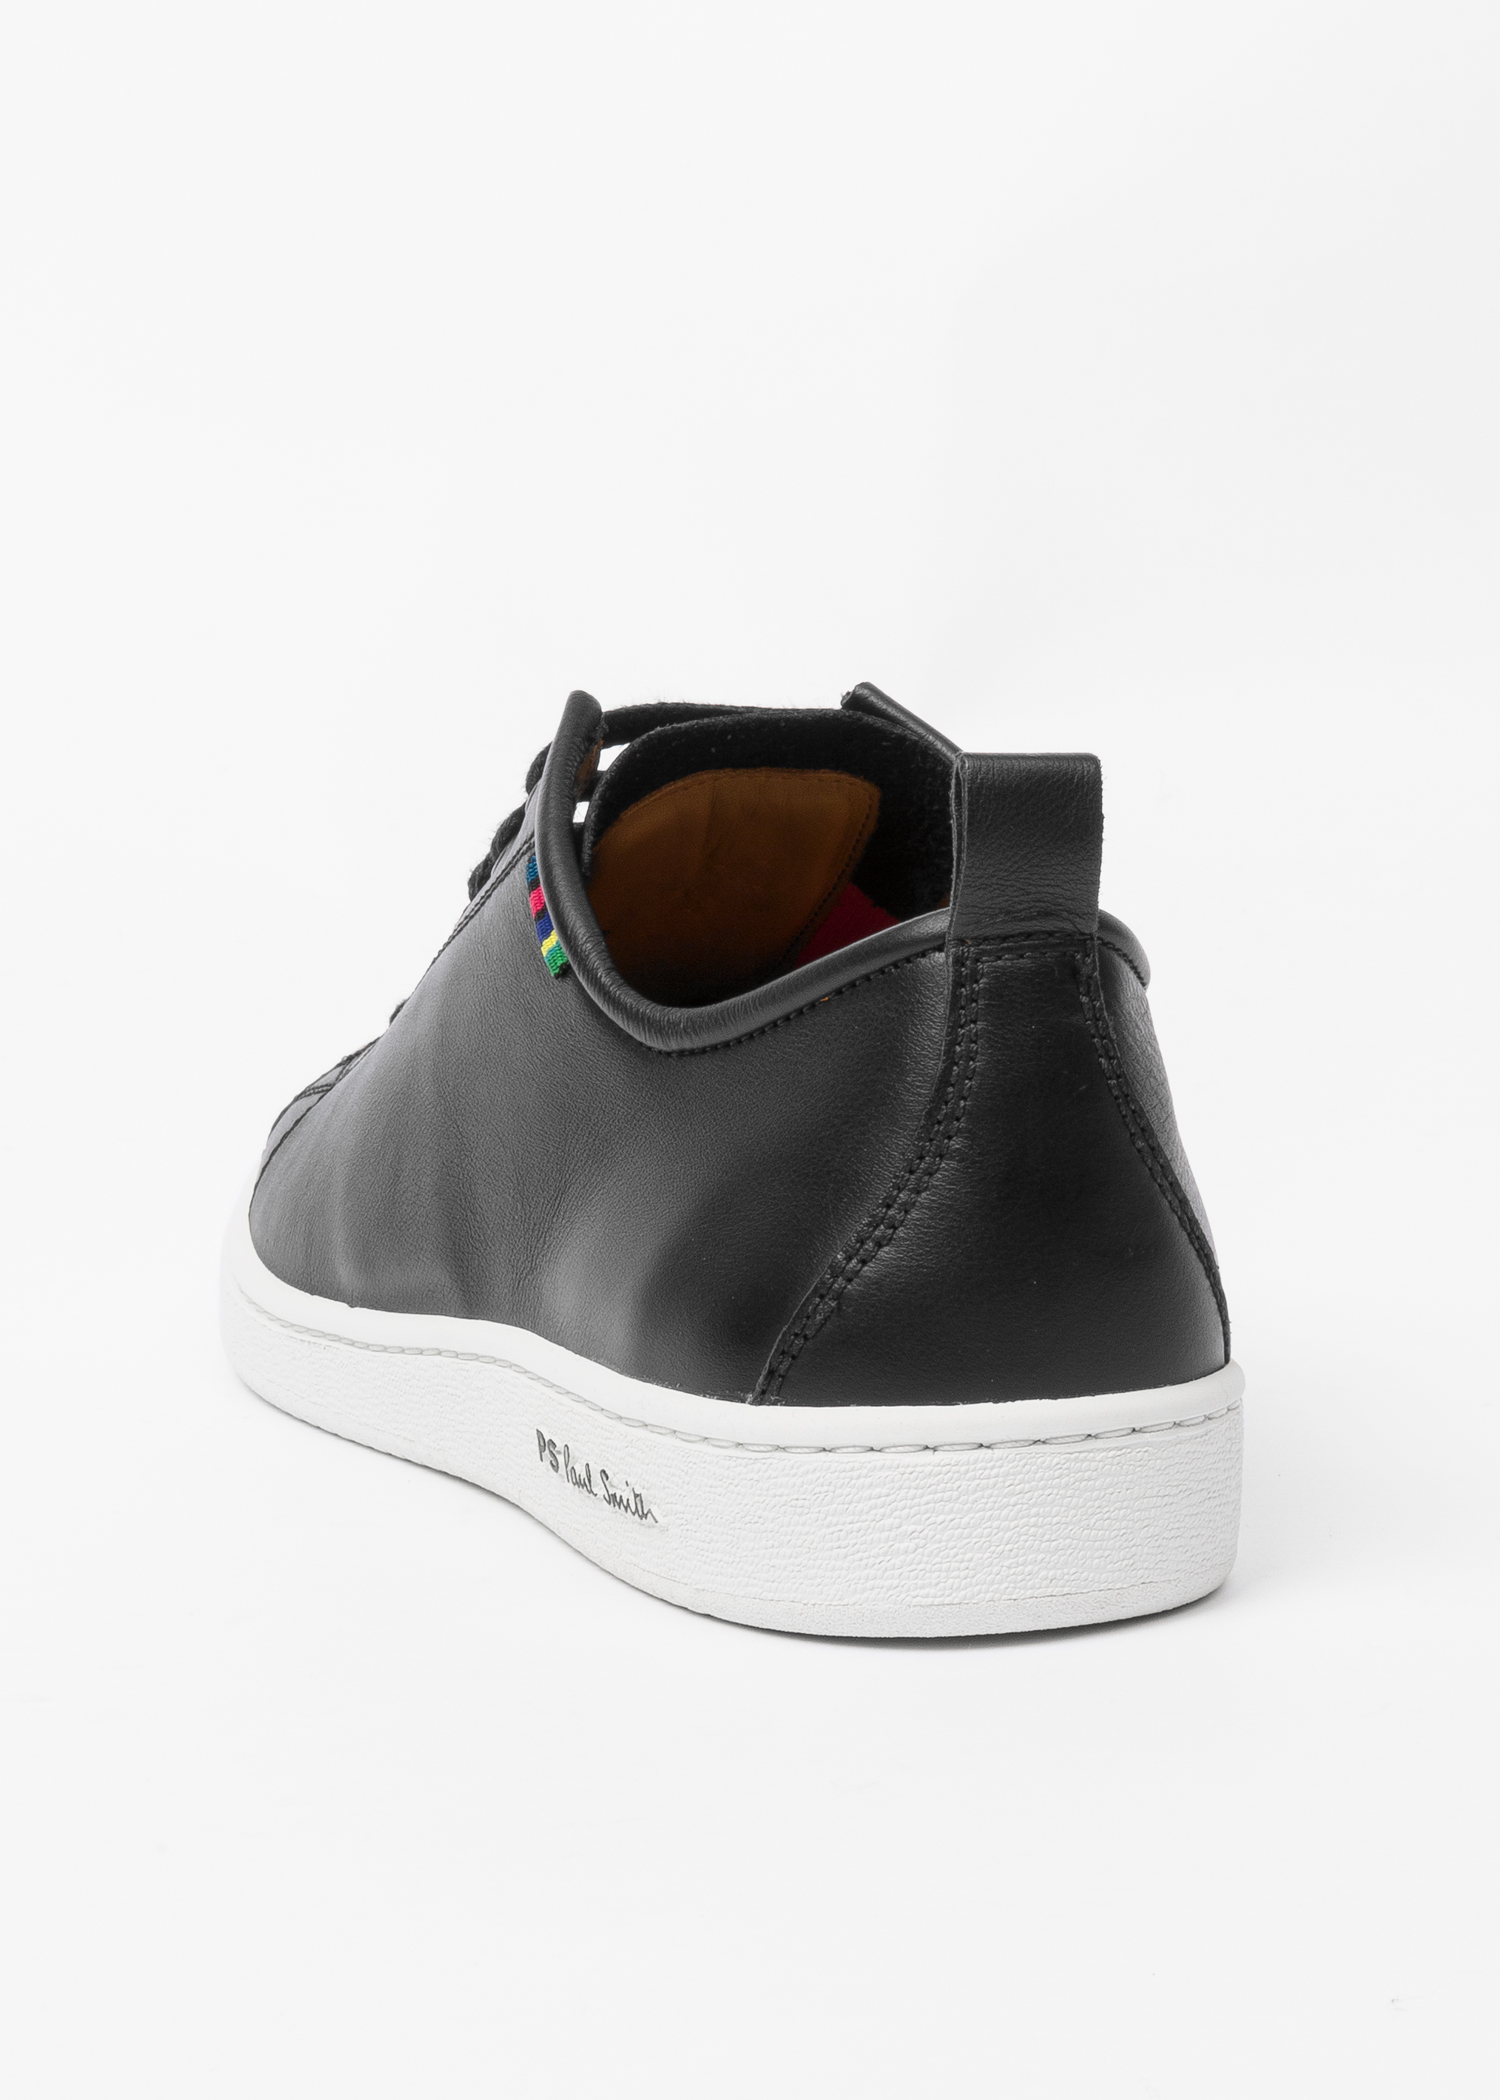 Men's Black Calf Leather 'Miyata' Trainers by Paul Smith